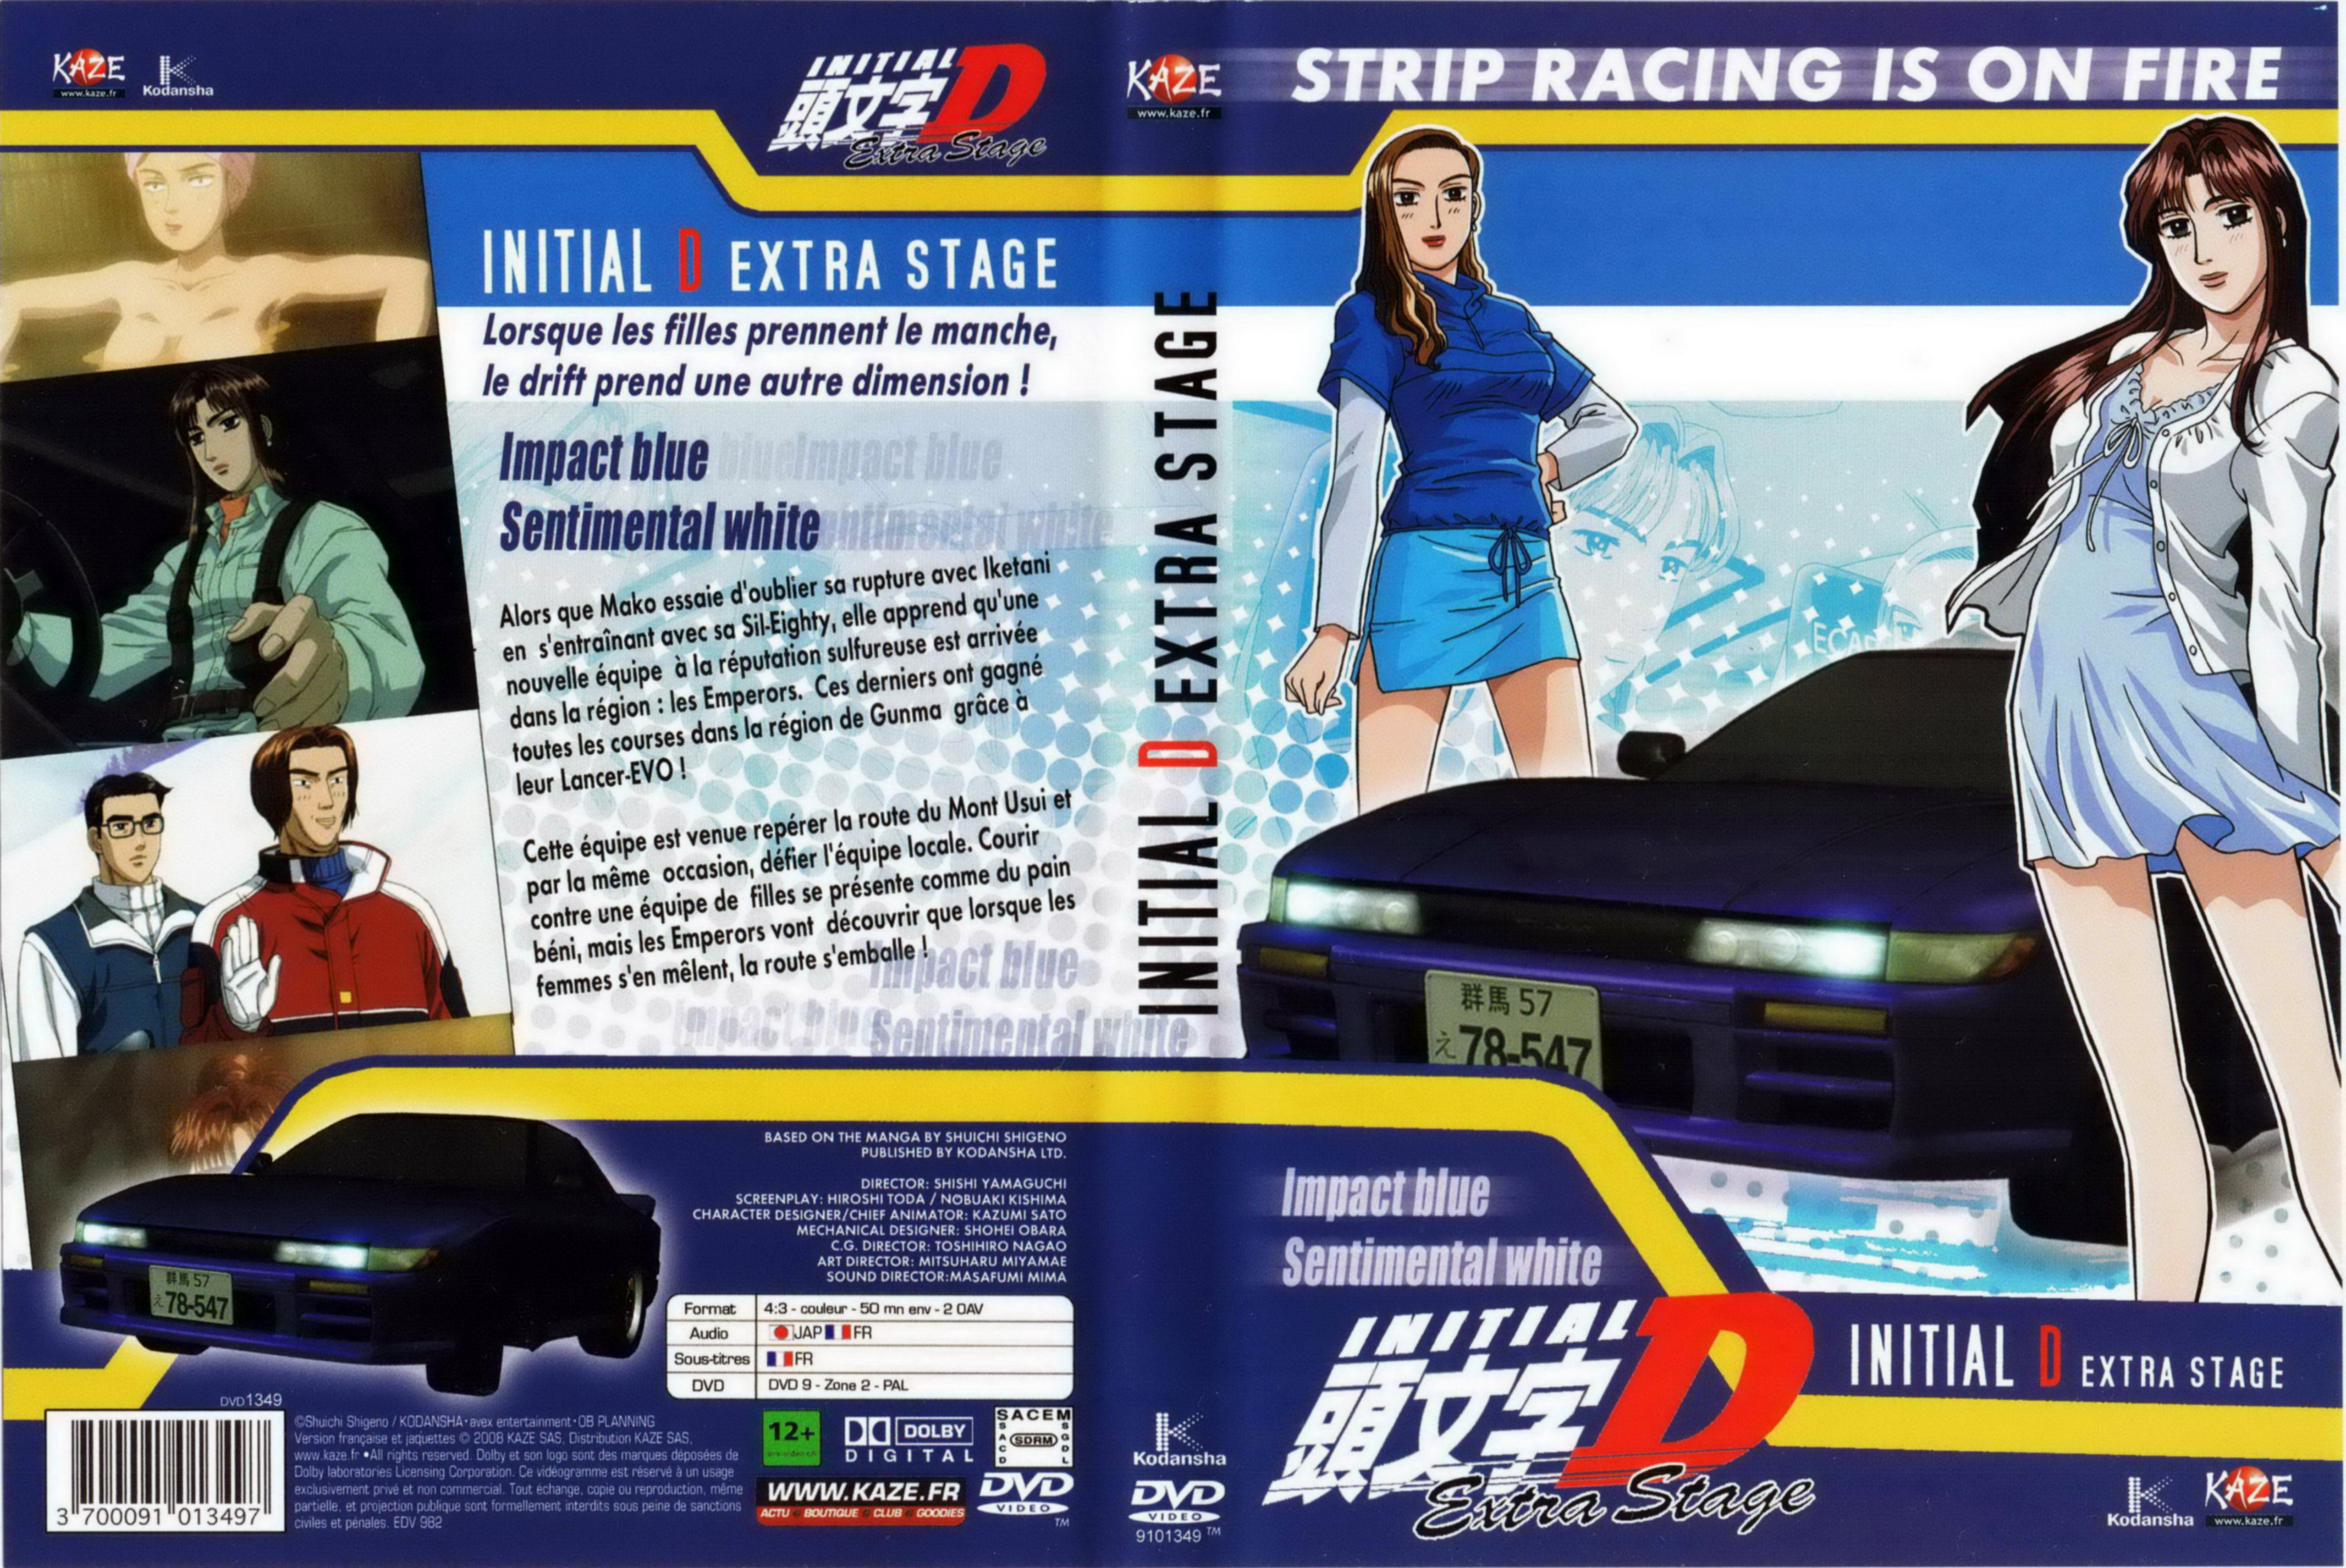 Jaquette DVD Initial D Extra stage